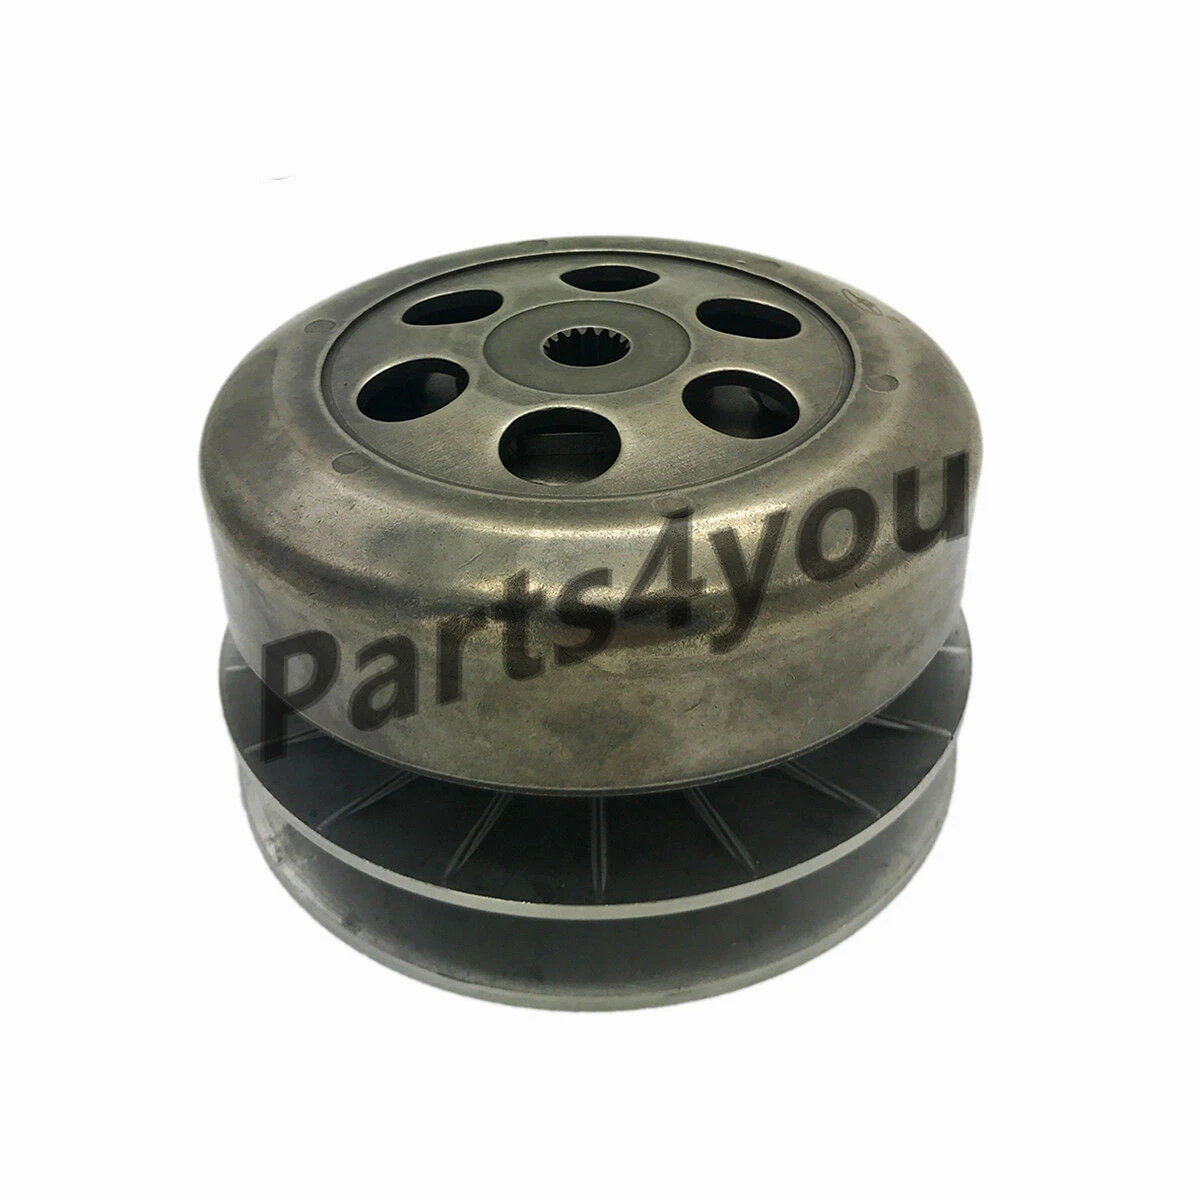 Secondary Clutch Variator Driven Pulley Assy for Stels 300B Buyang 300cc D300 G300 ATV Quad 2.3.01.1000 LU020075 secondary sheave complete driven clutch assy for linhai 260 300 23929 bashan 300 ba0101